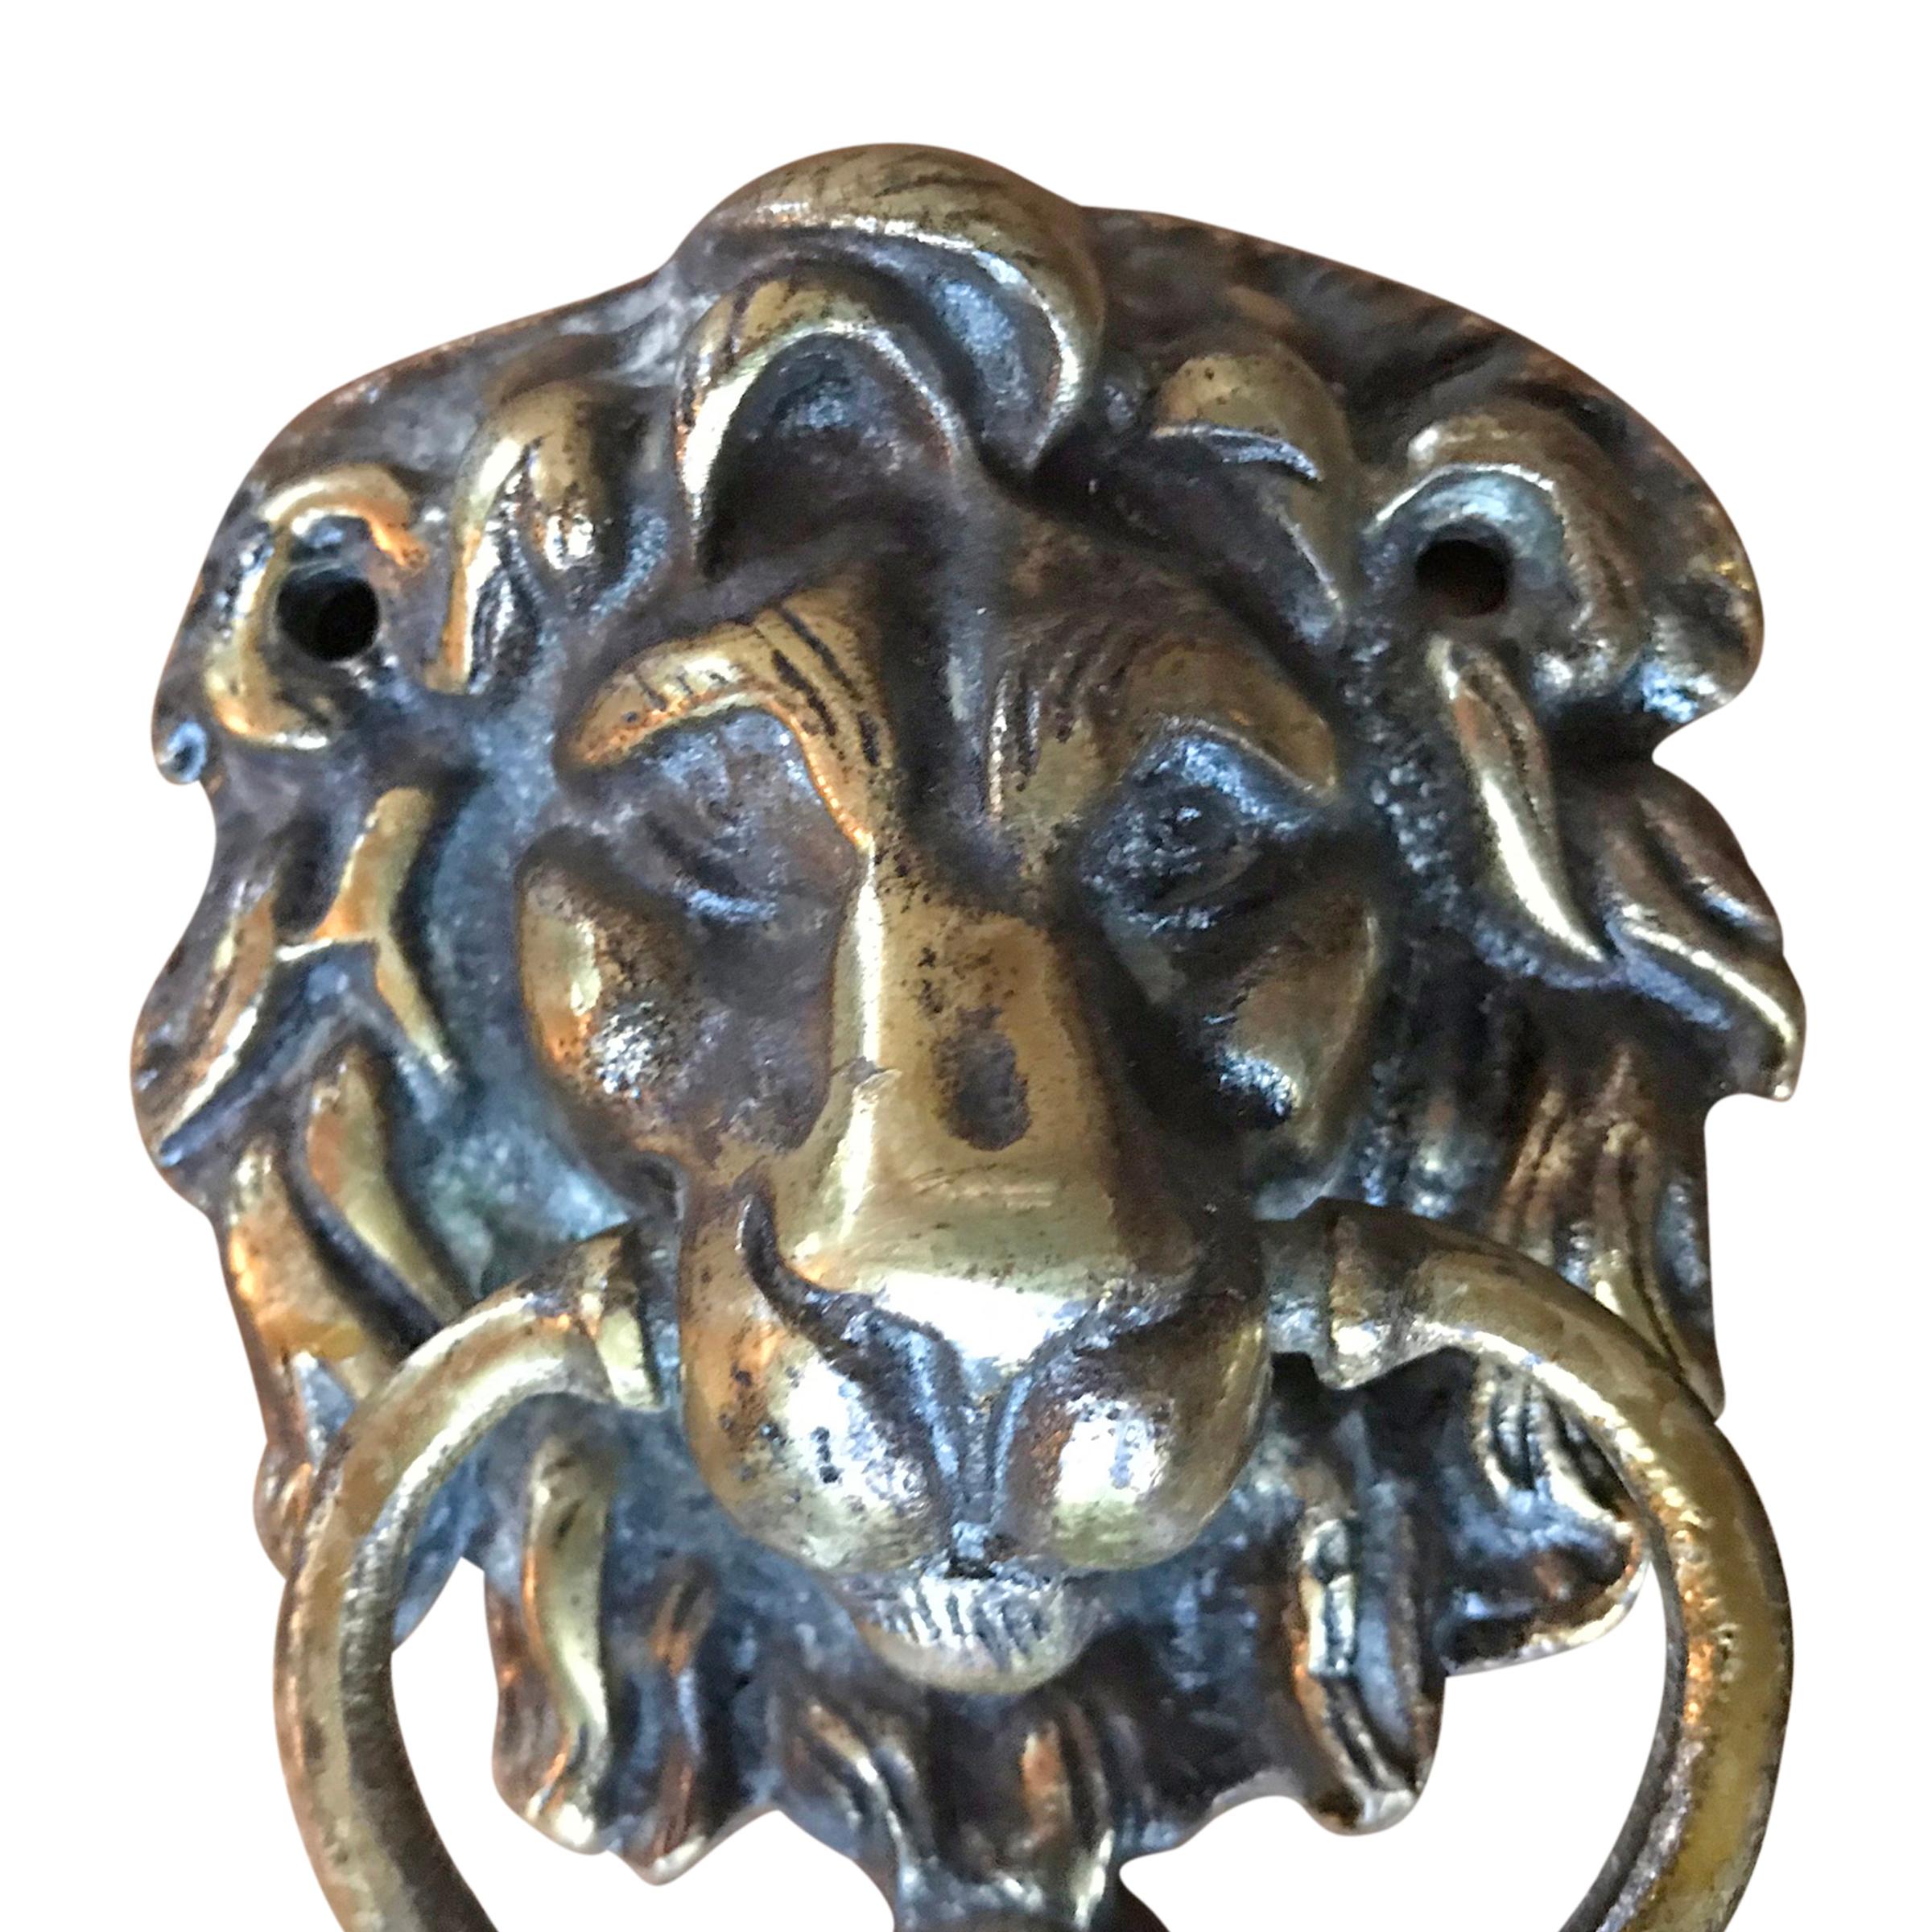 An early 20th century English cast brass lion head door knocker with a ring used for knocking, and a round plate stamped with the word, 